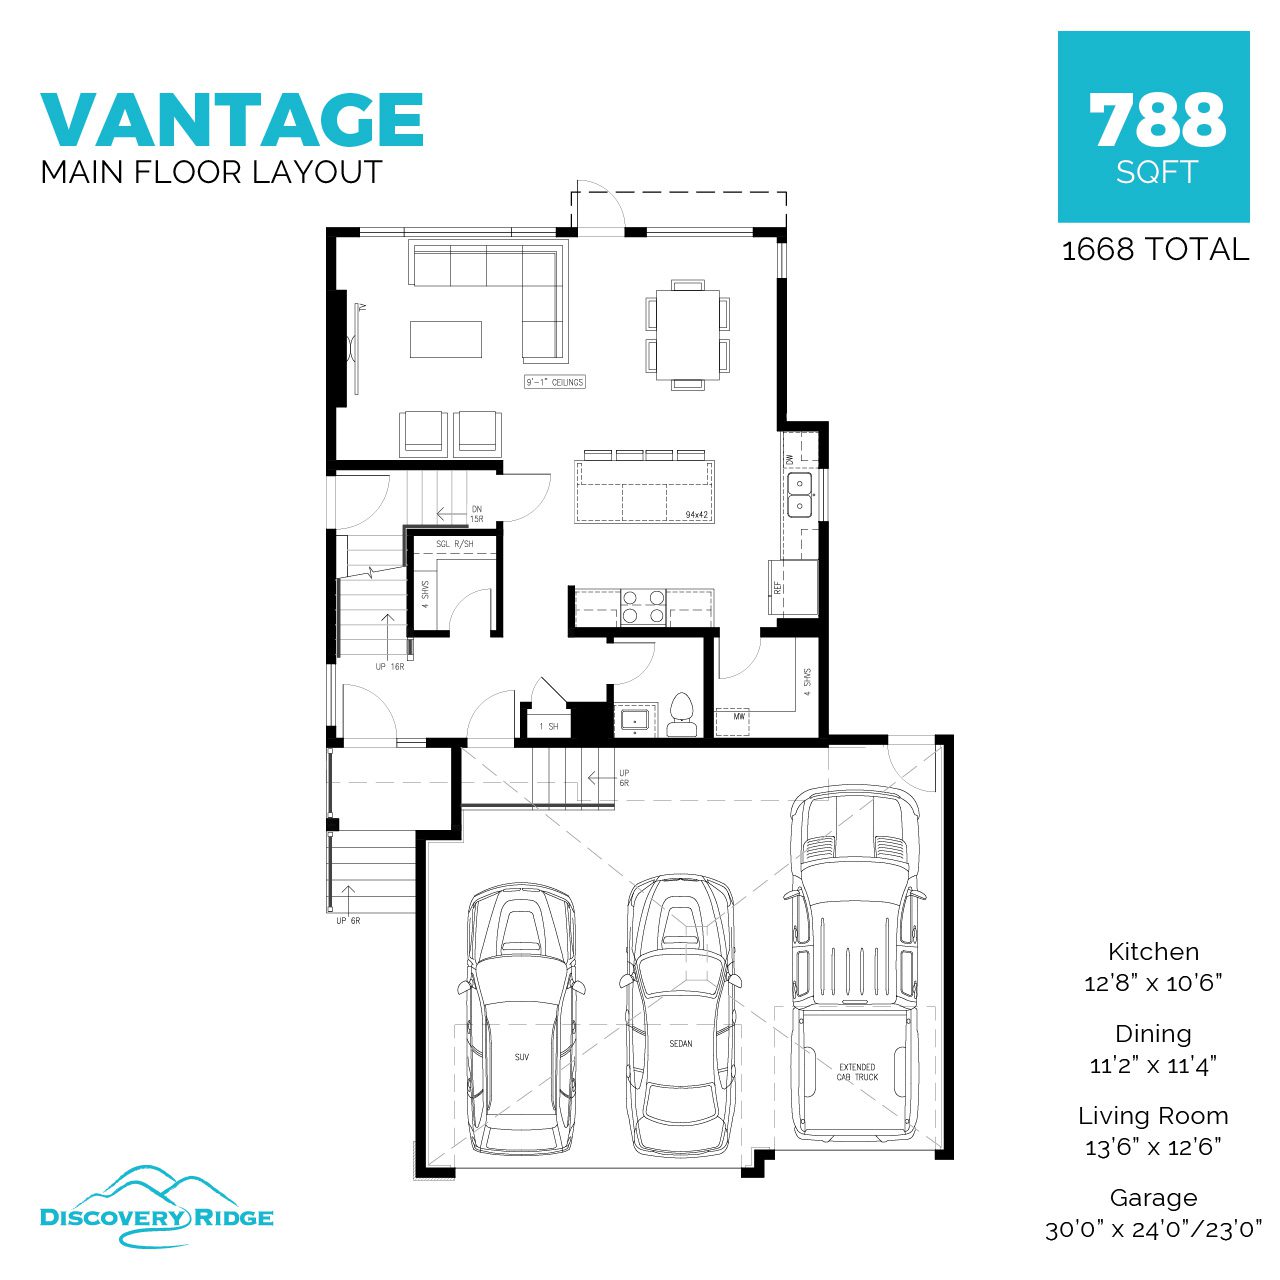 A floor plan depicting the main level of a two-storey home located in Pilot Butte.